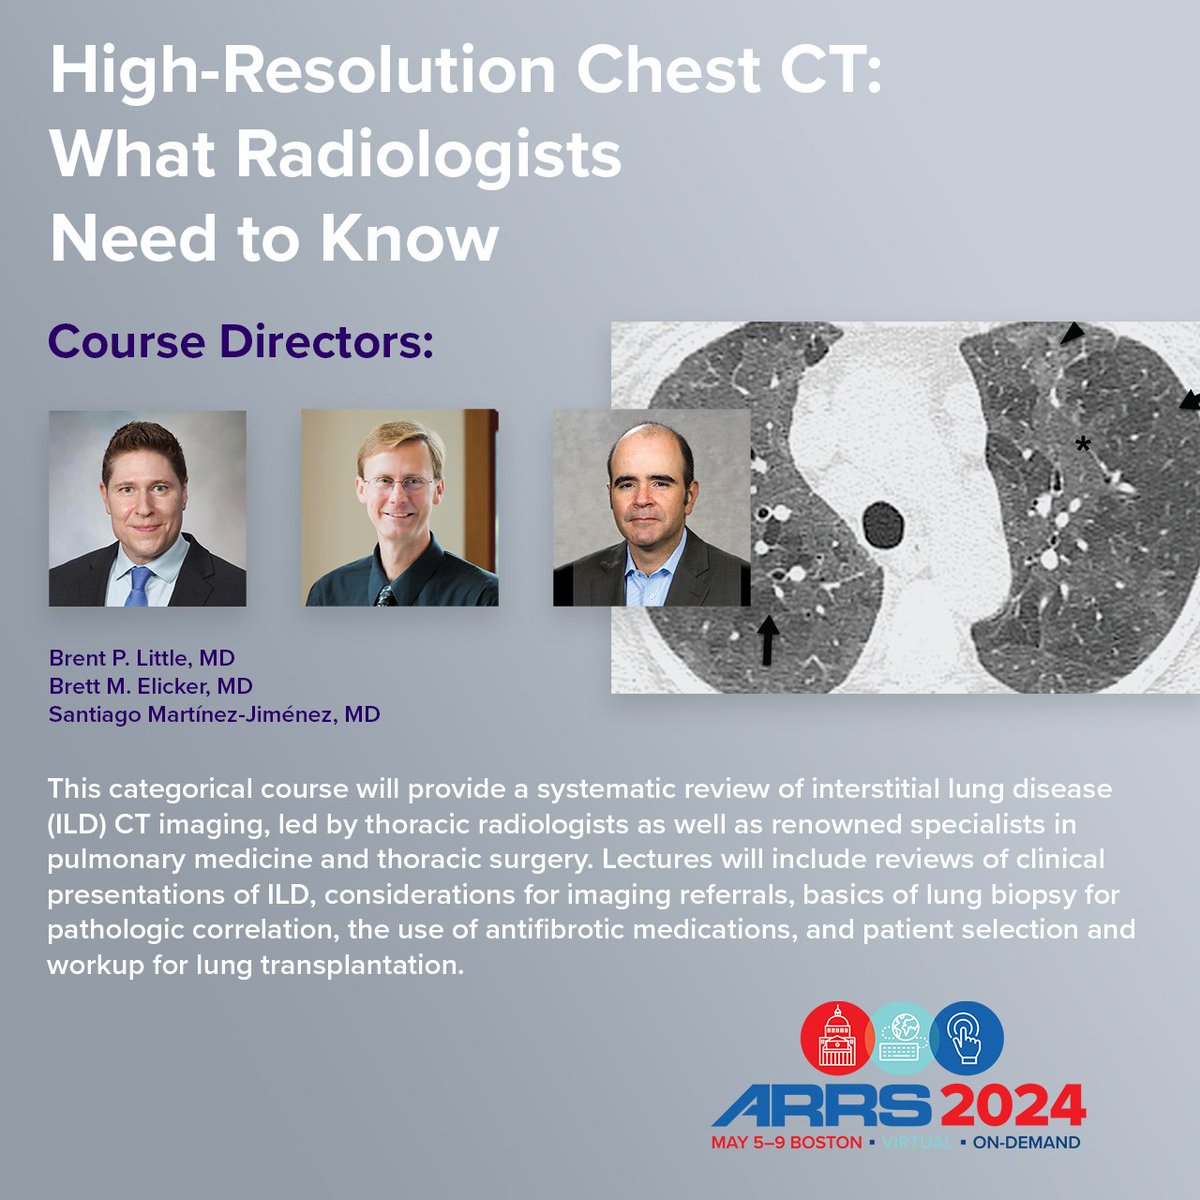 We've got ✌️ Categorical Courses taking place at #ARRS24 this year which can be added to meeting registration. Save when you sign up for both. Critical Care and ICU Imaging - www2.arrs.org/am24/cat-cours… High-Resolution Chest CT - www2.arrs.org/am24/cat-cours…